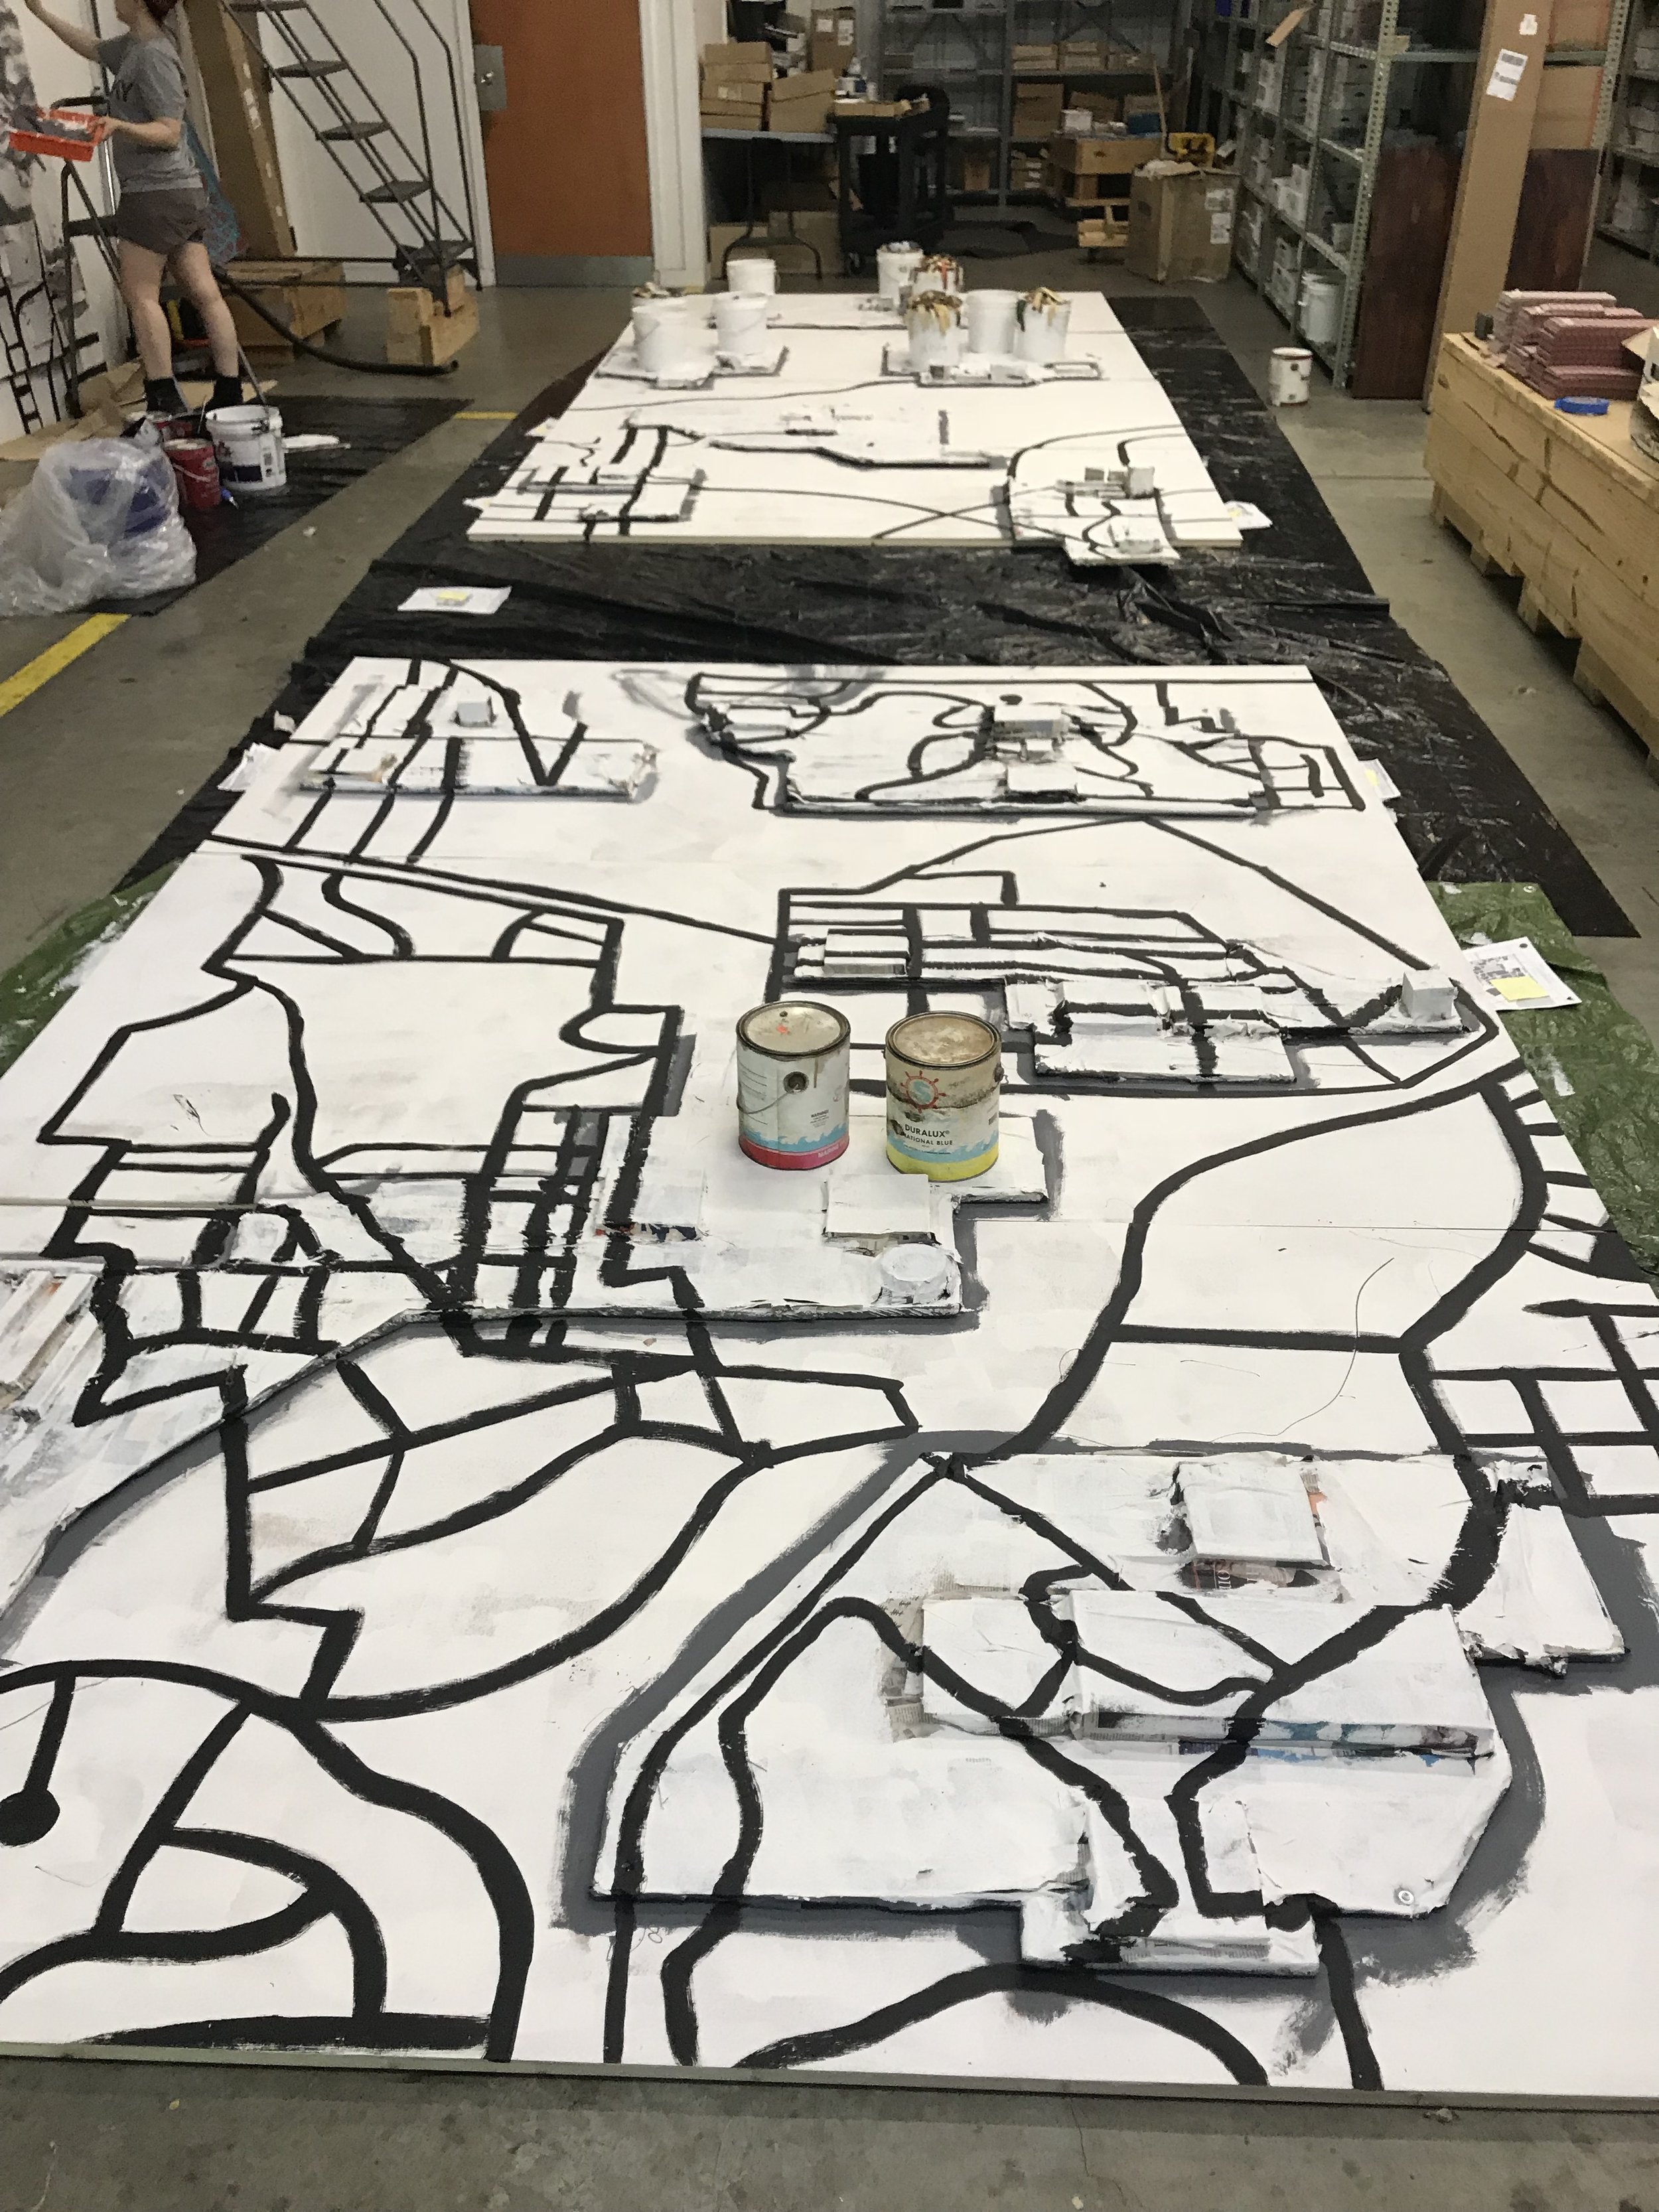 The-first-map-layer-mural.jpg